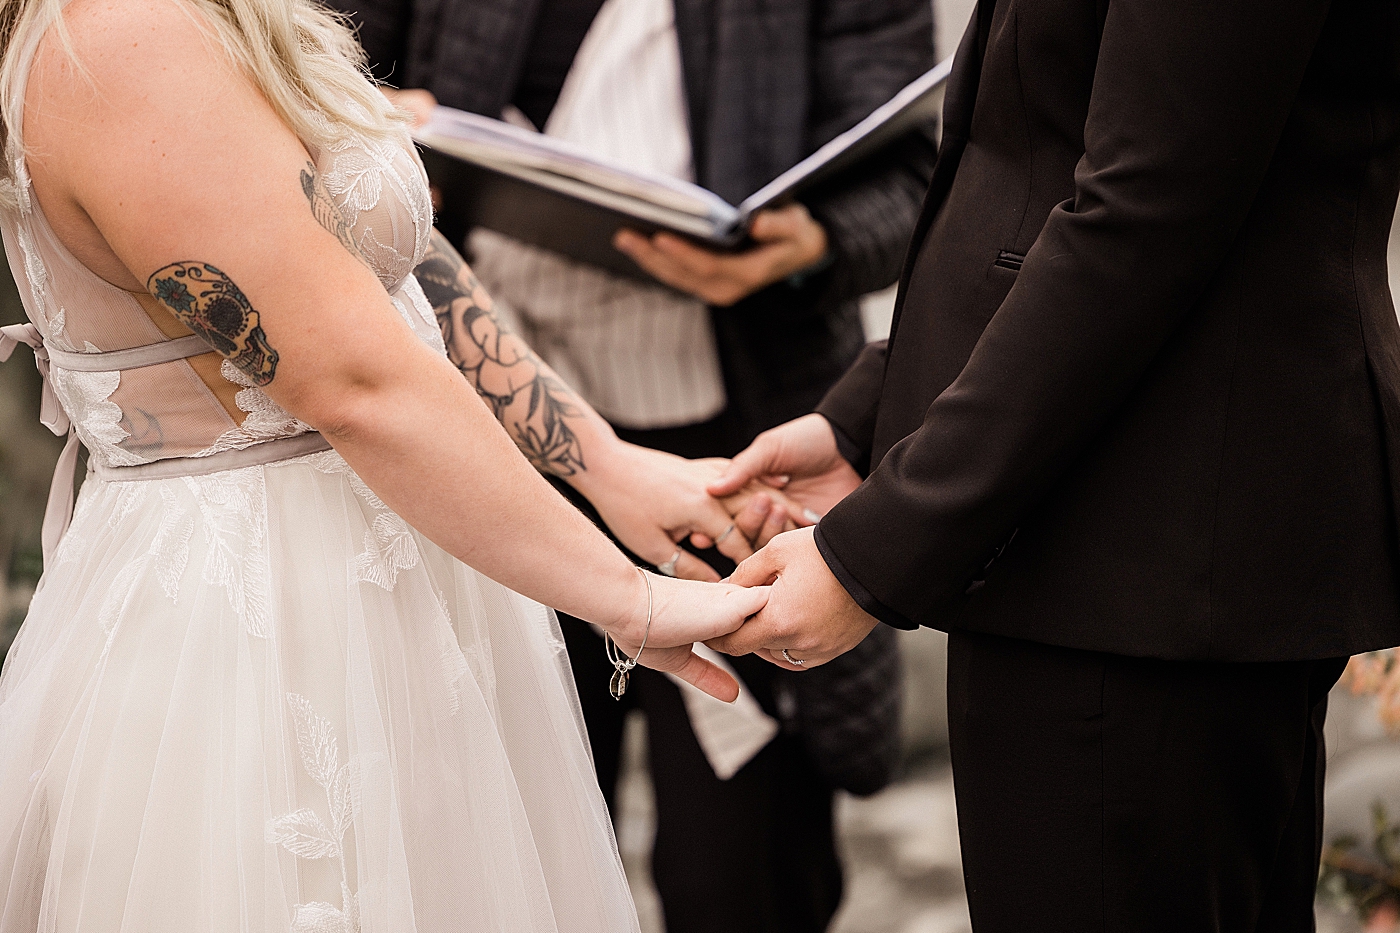 Brides holding hands | Photo by Megan Montalvo Photography